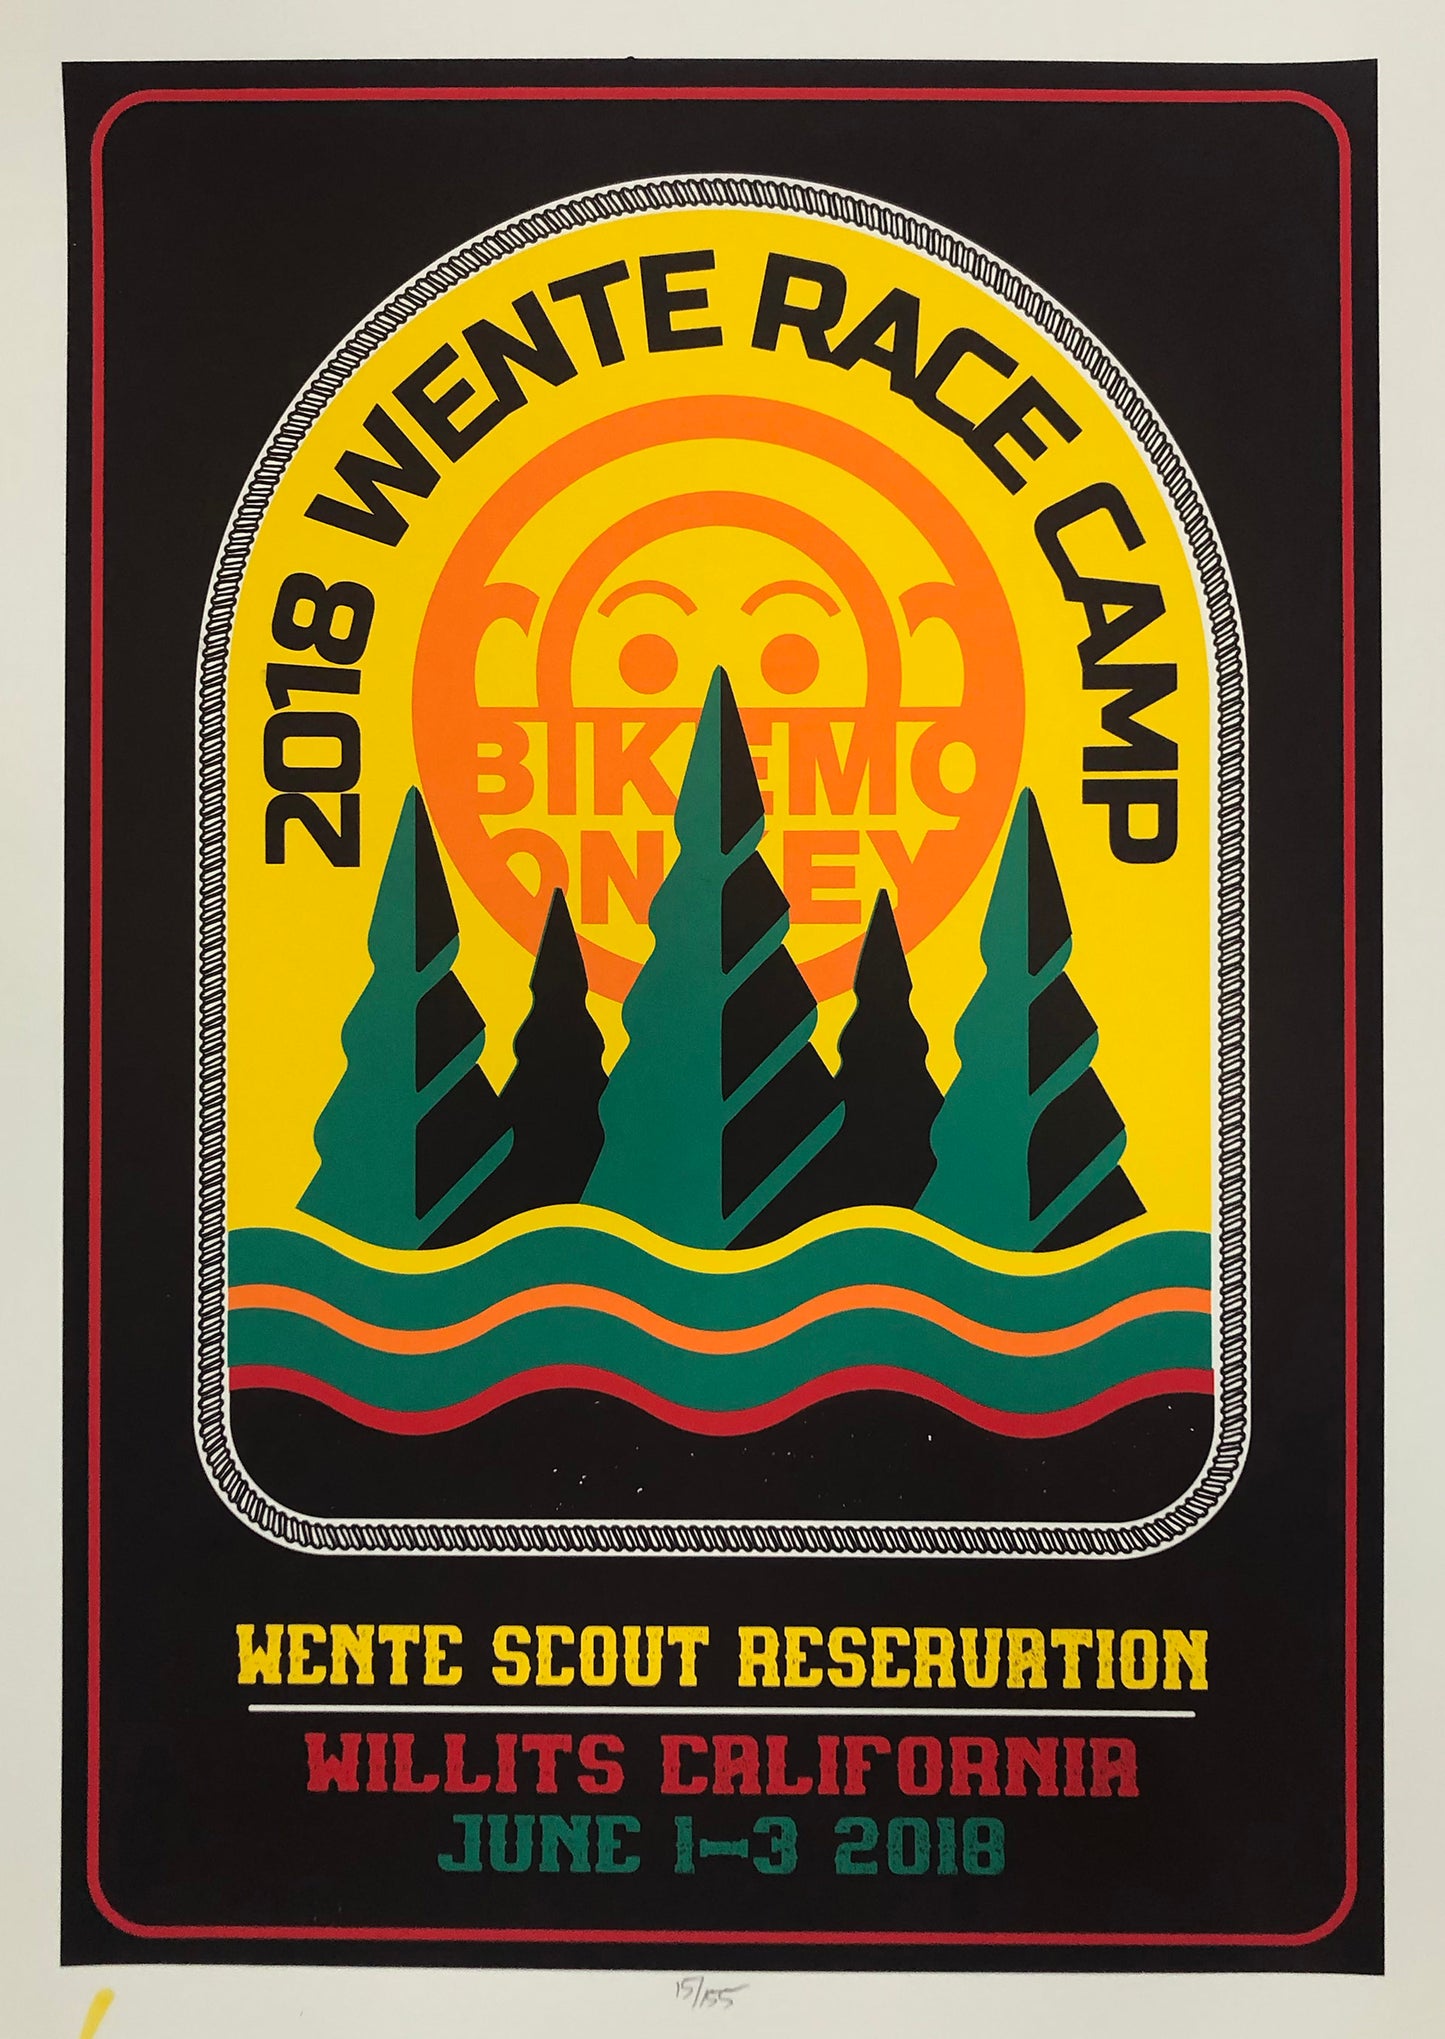 Wente Camp poster by Carlos Perez and Fred Struckholz